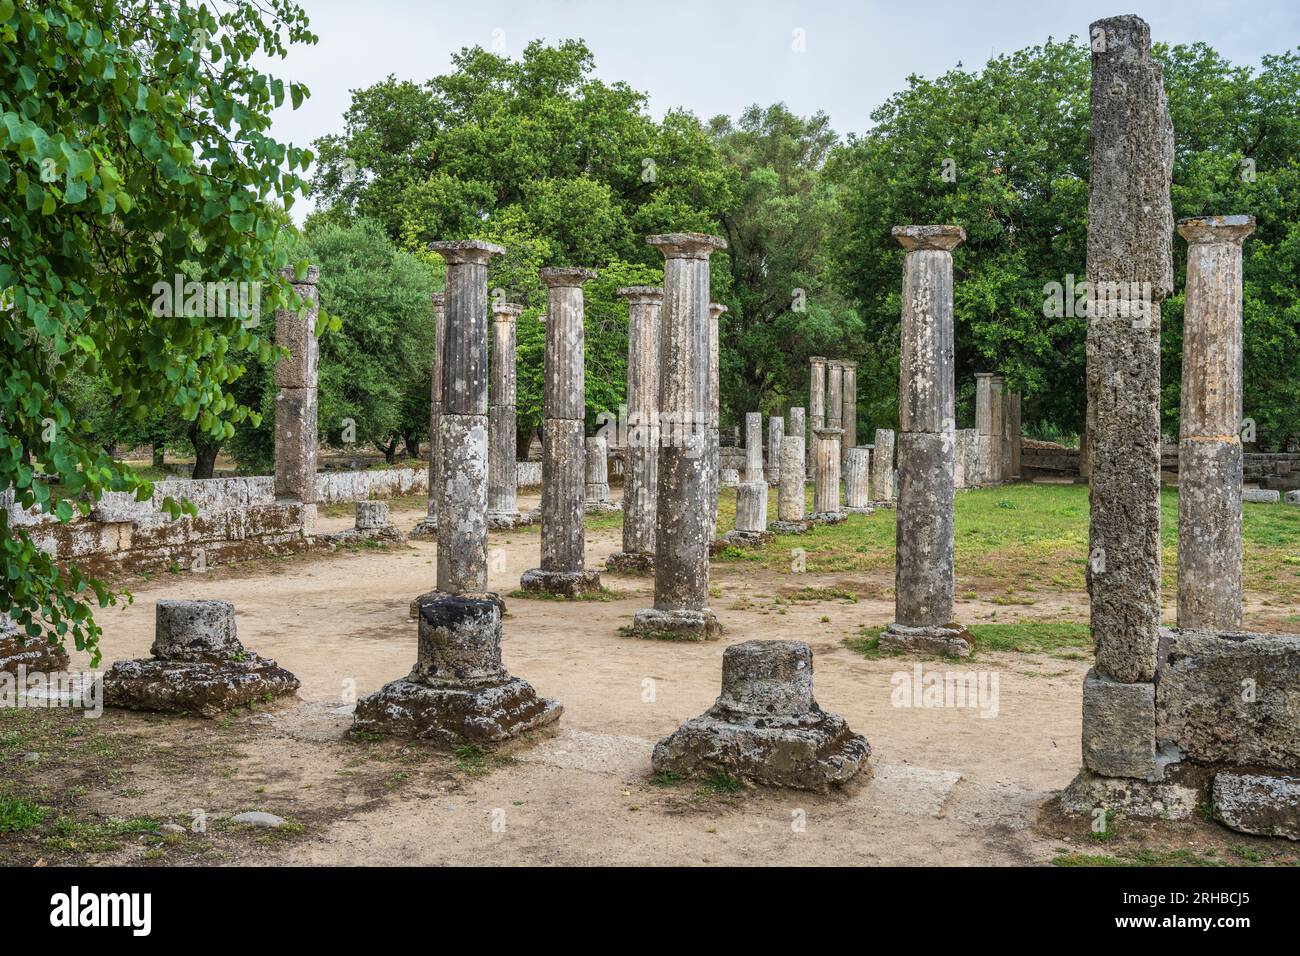 The ruins of the Palaestra (wrestling grounds) at ancient Olympia, birthplace of the Olympic Games, in Elis, Peloponnese, Greece Stock Photo